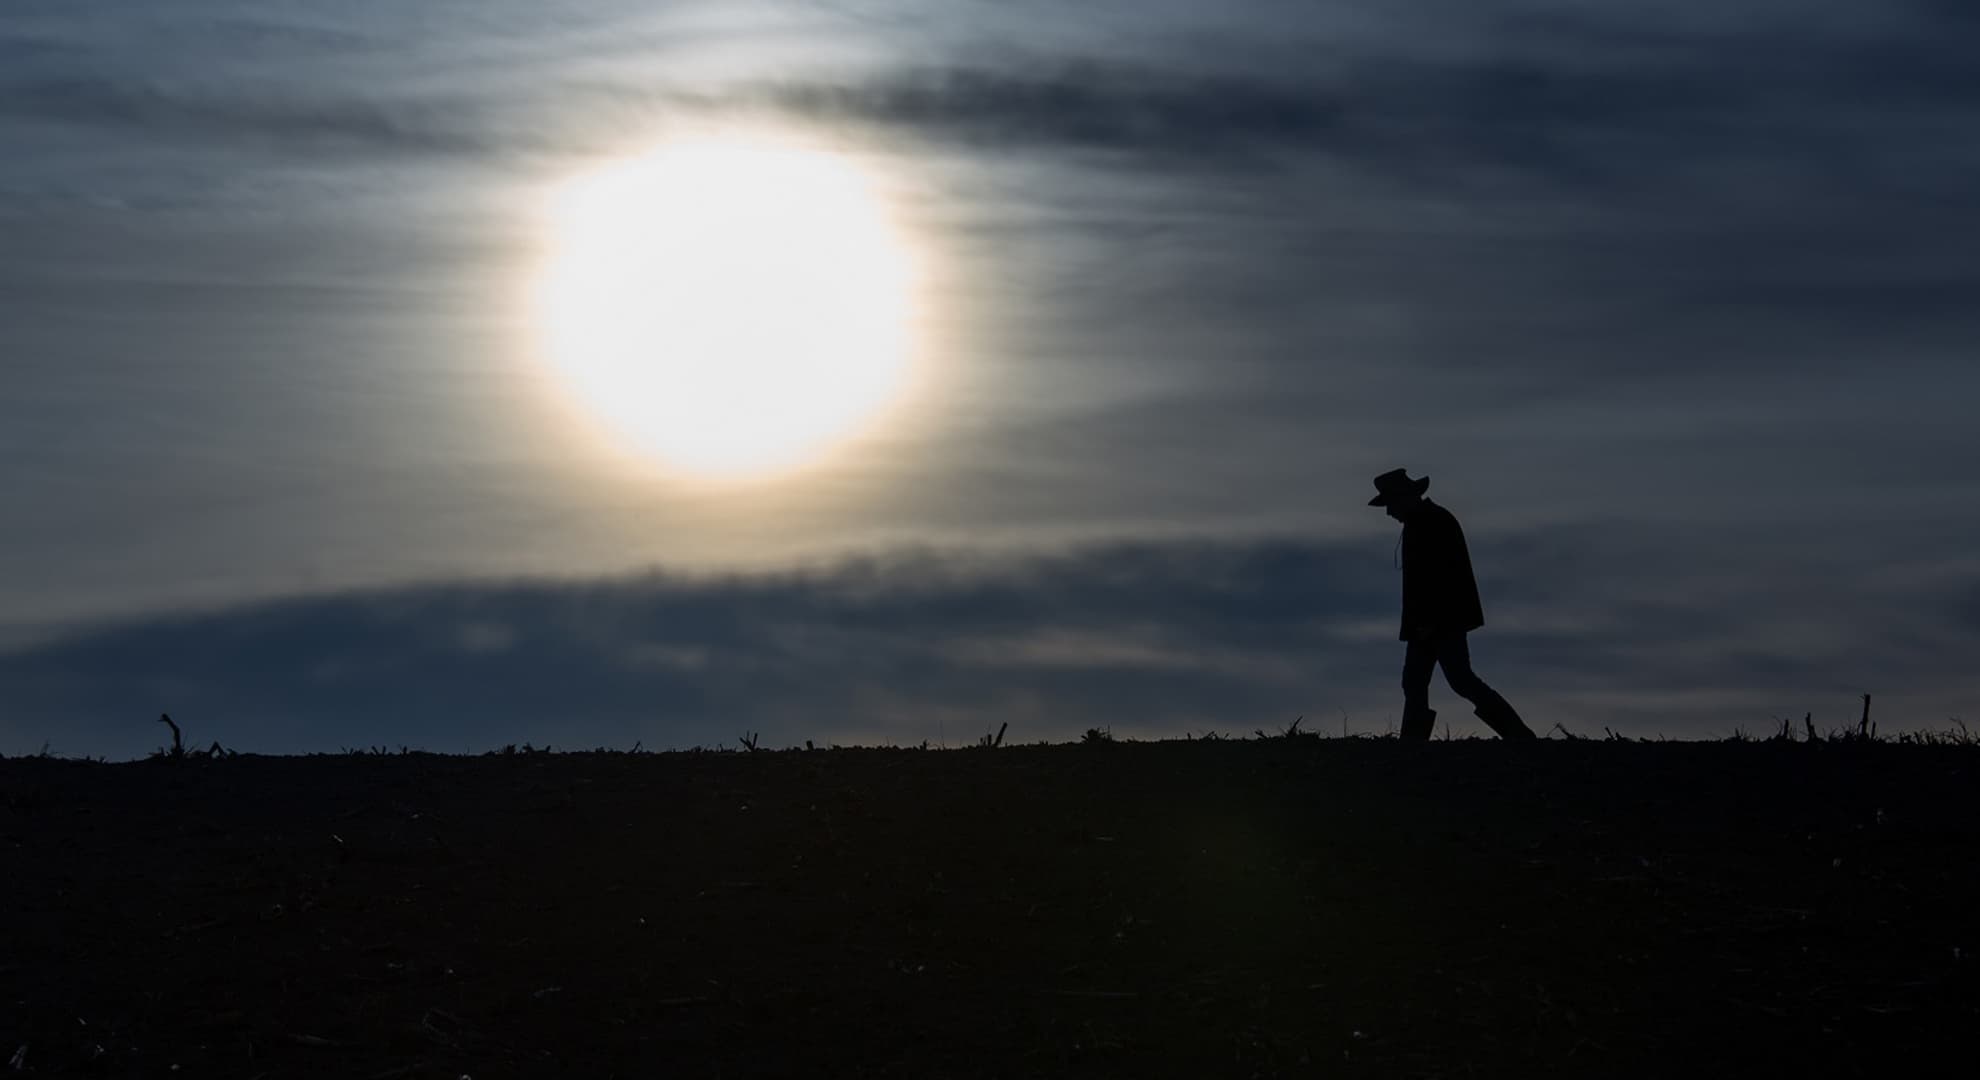 Silhouette of a farmer in a field with the sun low in the sky.